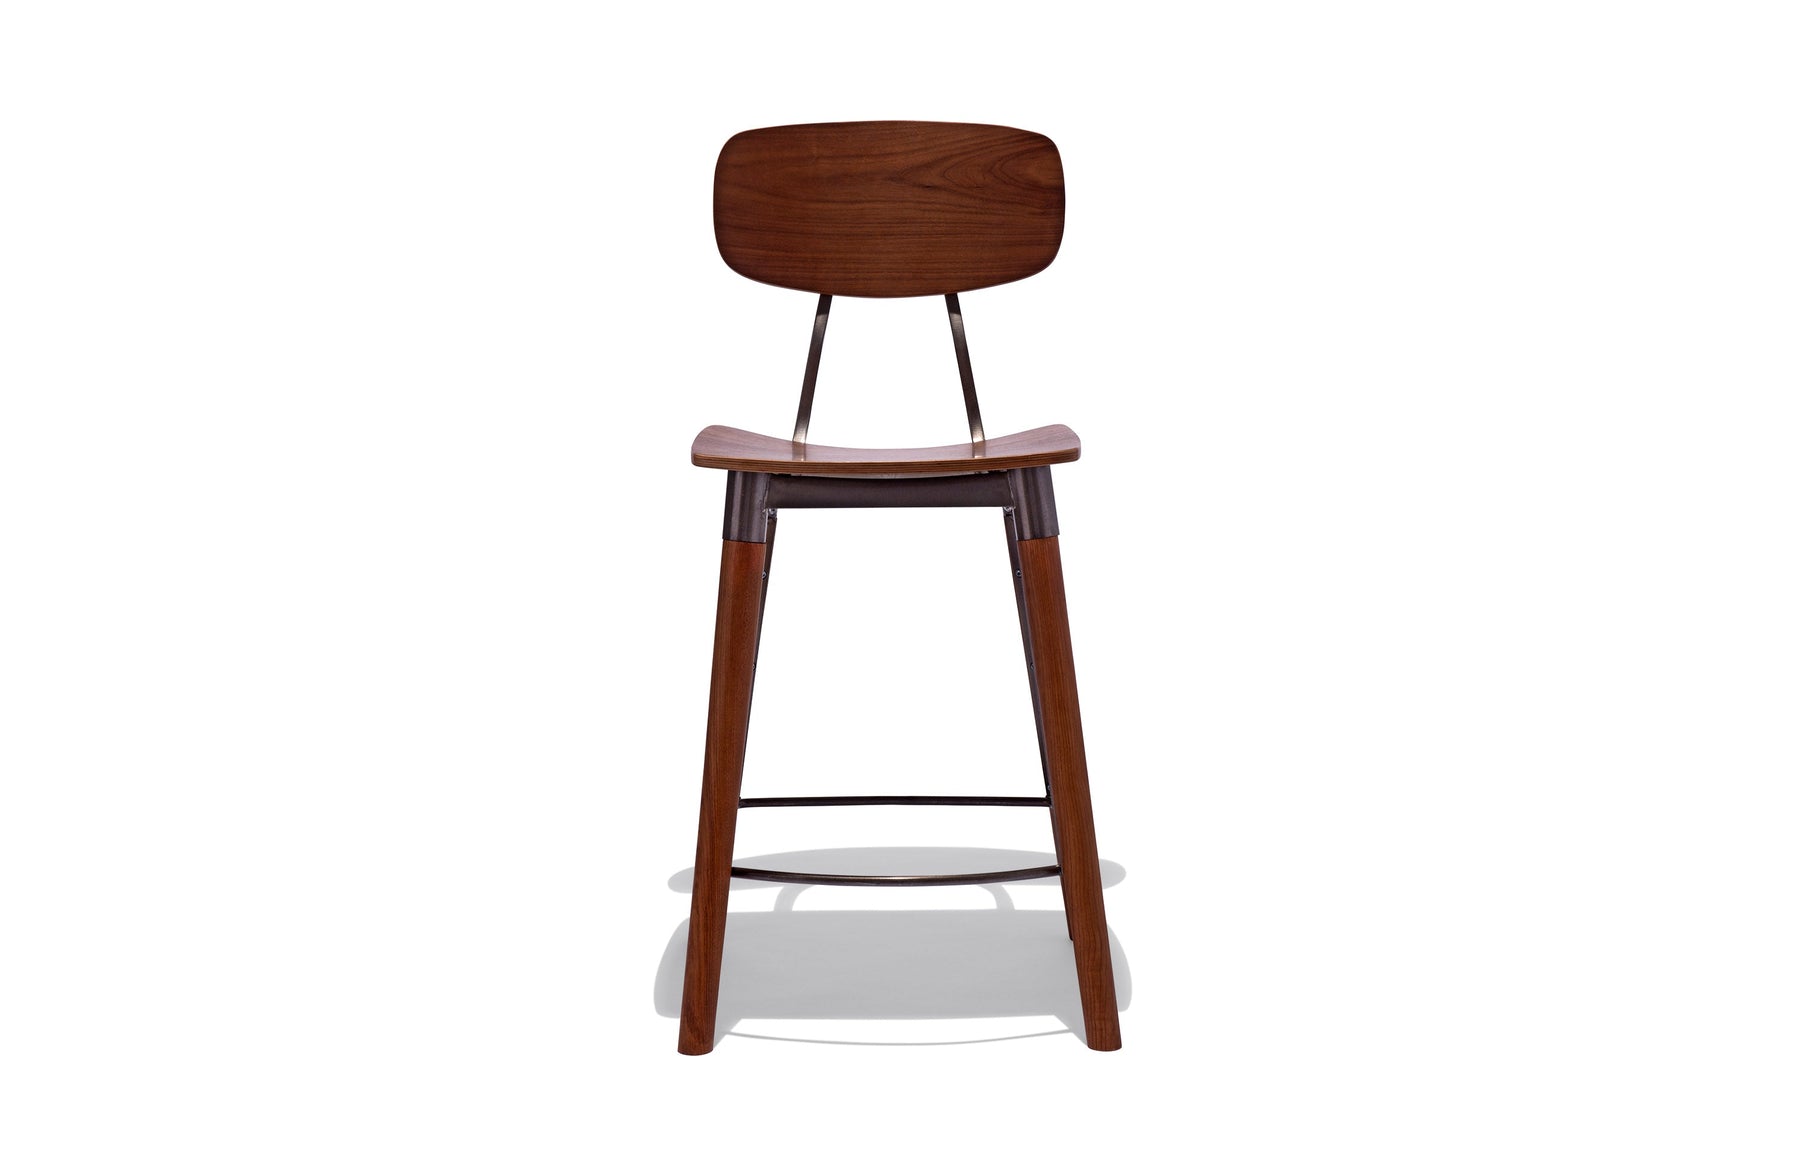 Public Counter and Bar Stool